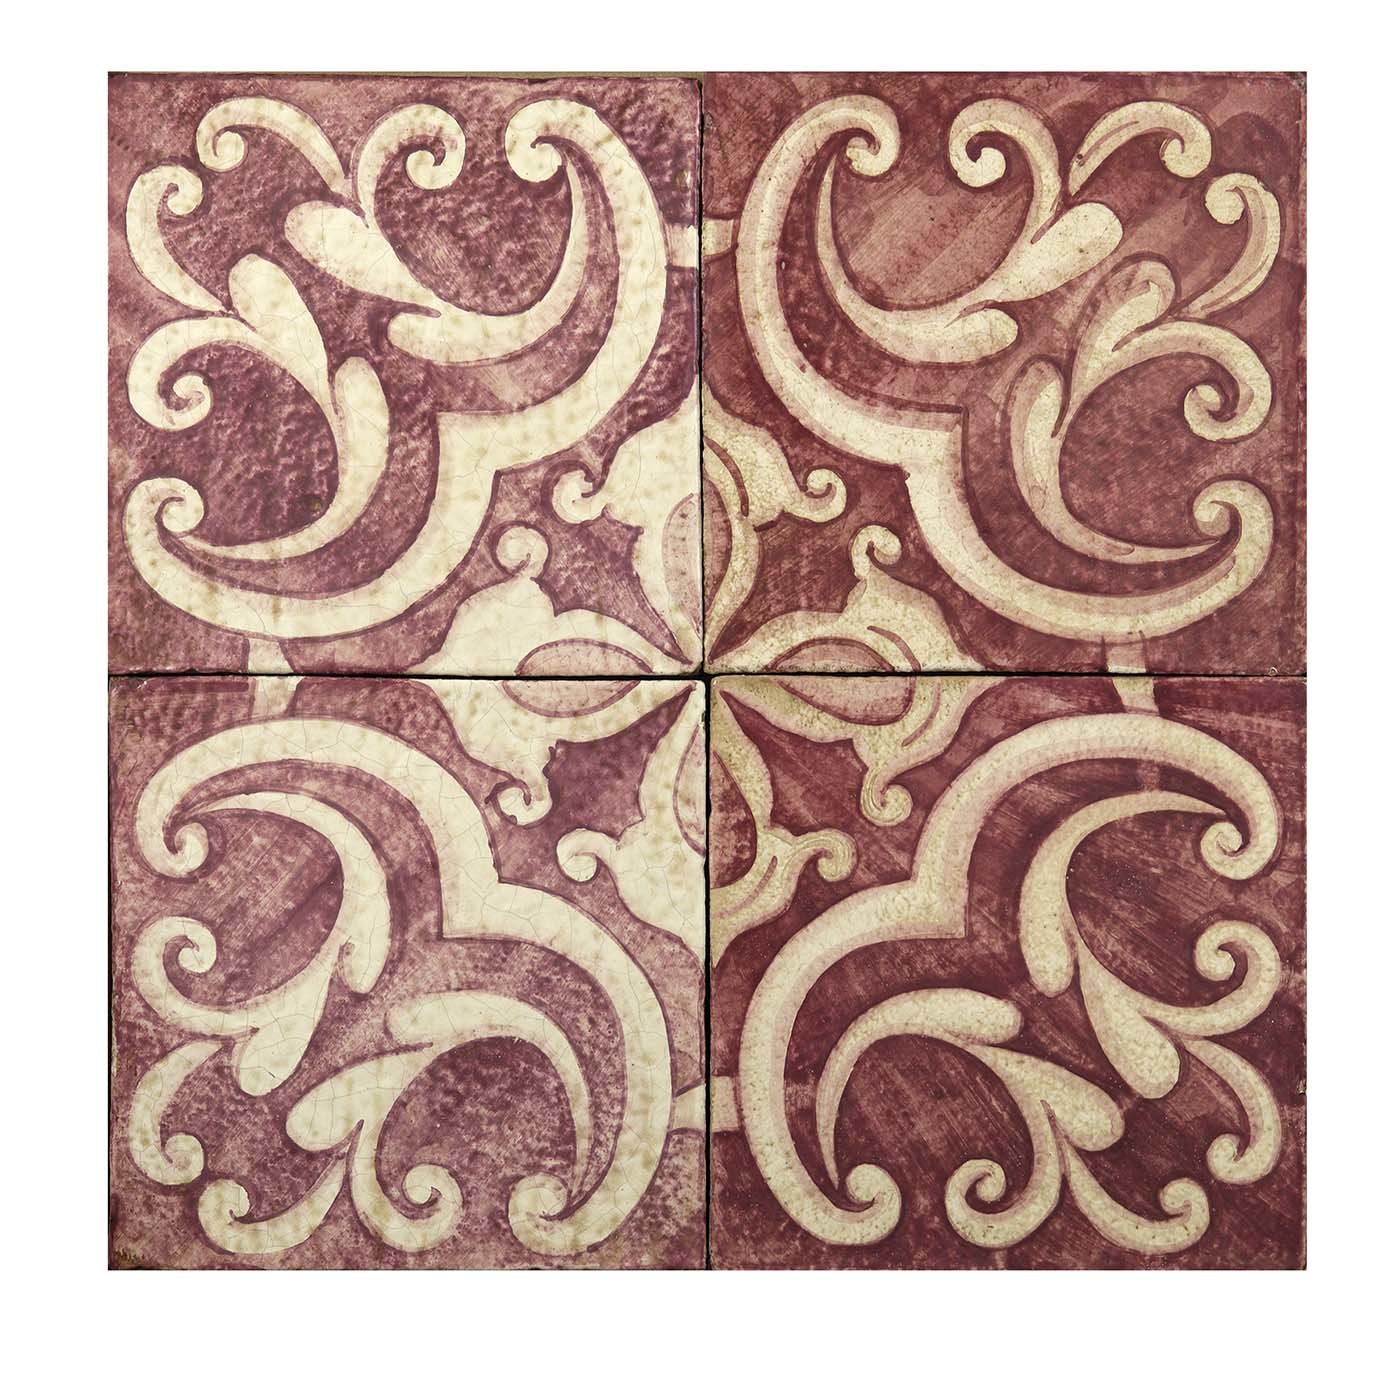 Rosso Ficus Indica Set of 4 Tiles #5 - Main view